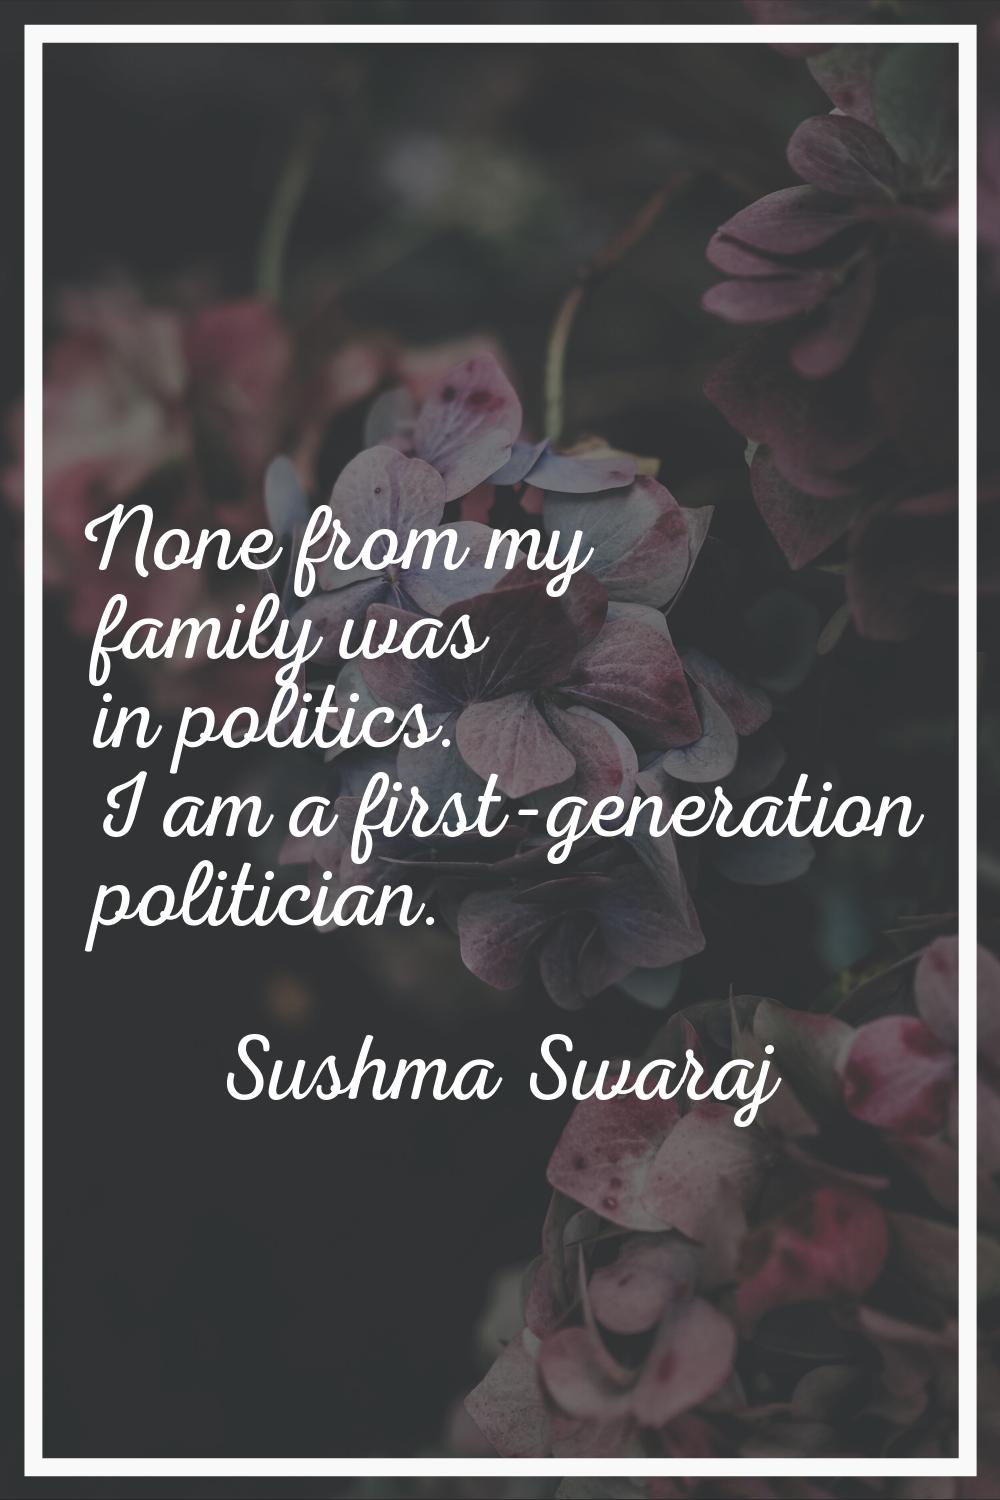 None from my family was in politics. I am a first-generation politician.